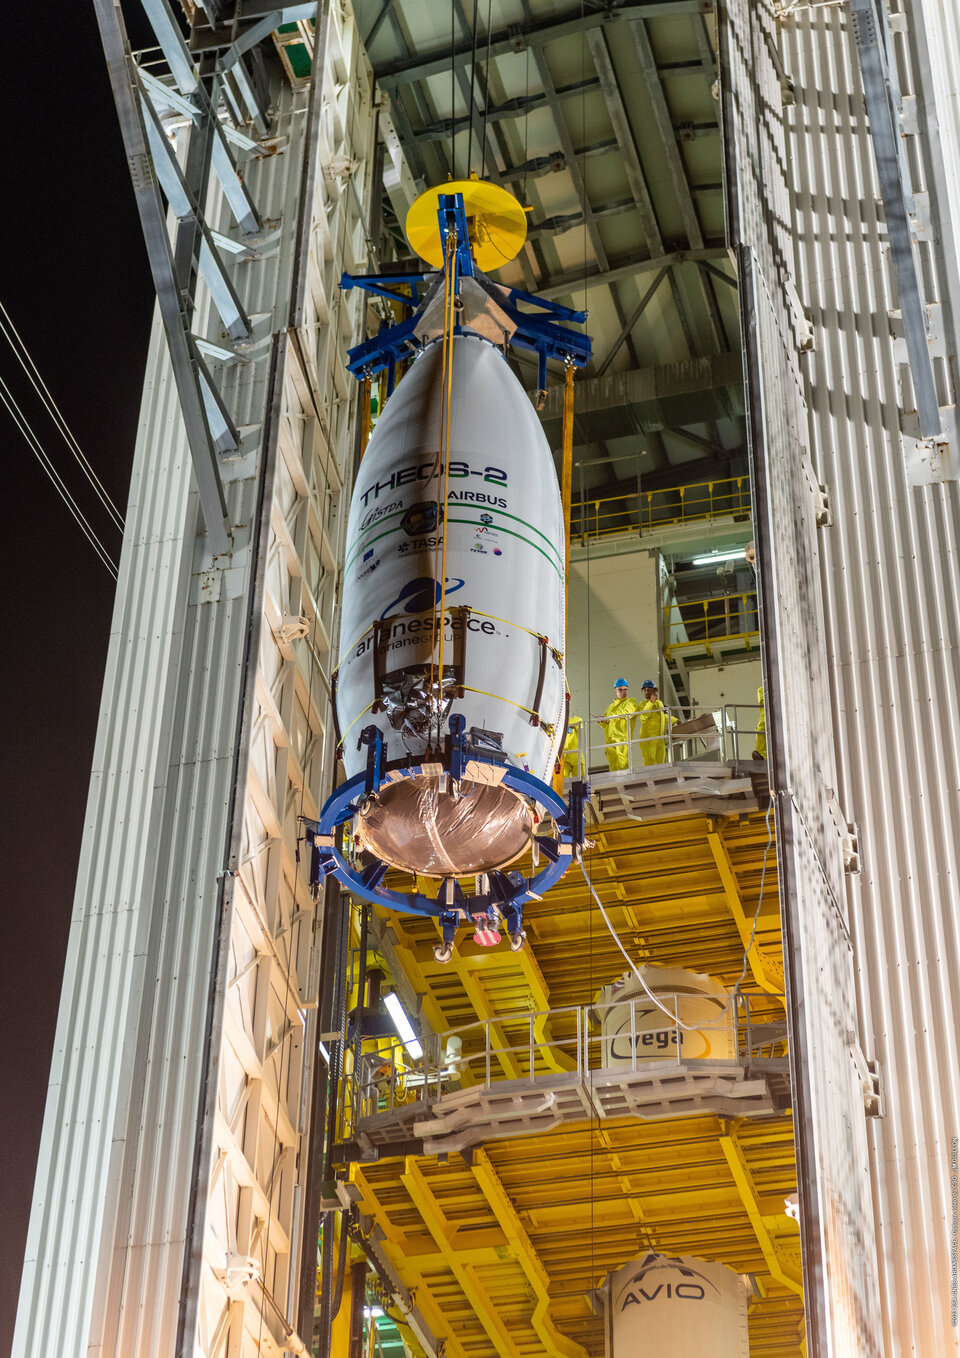 Vega upper composite being lifted onto launcher